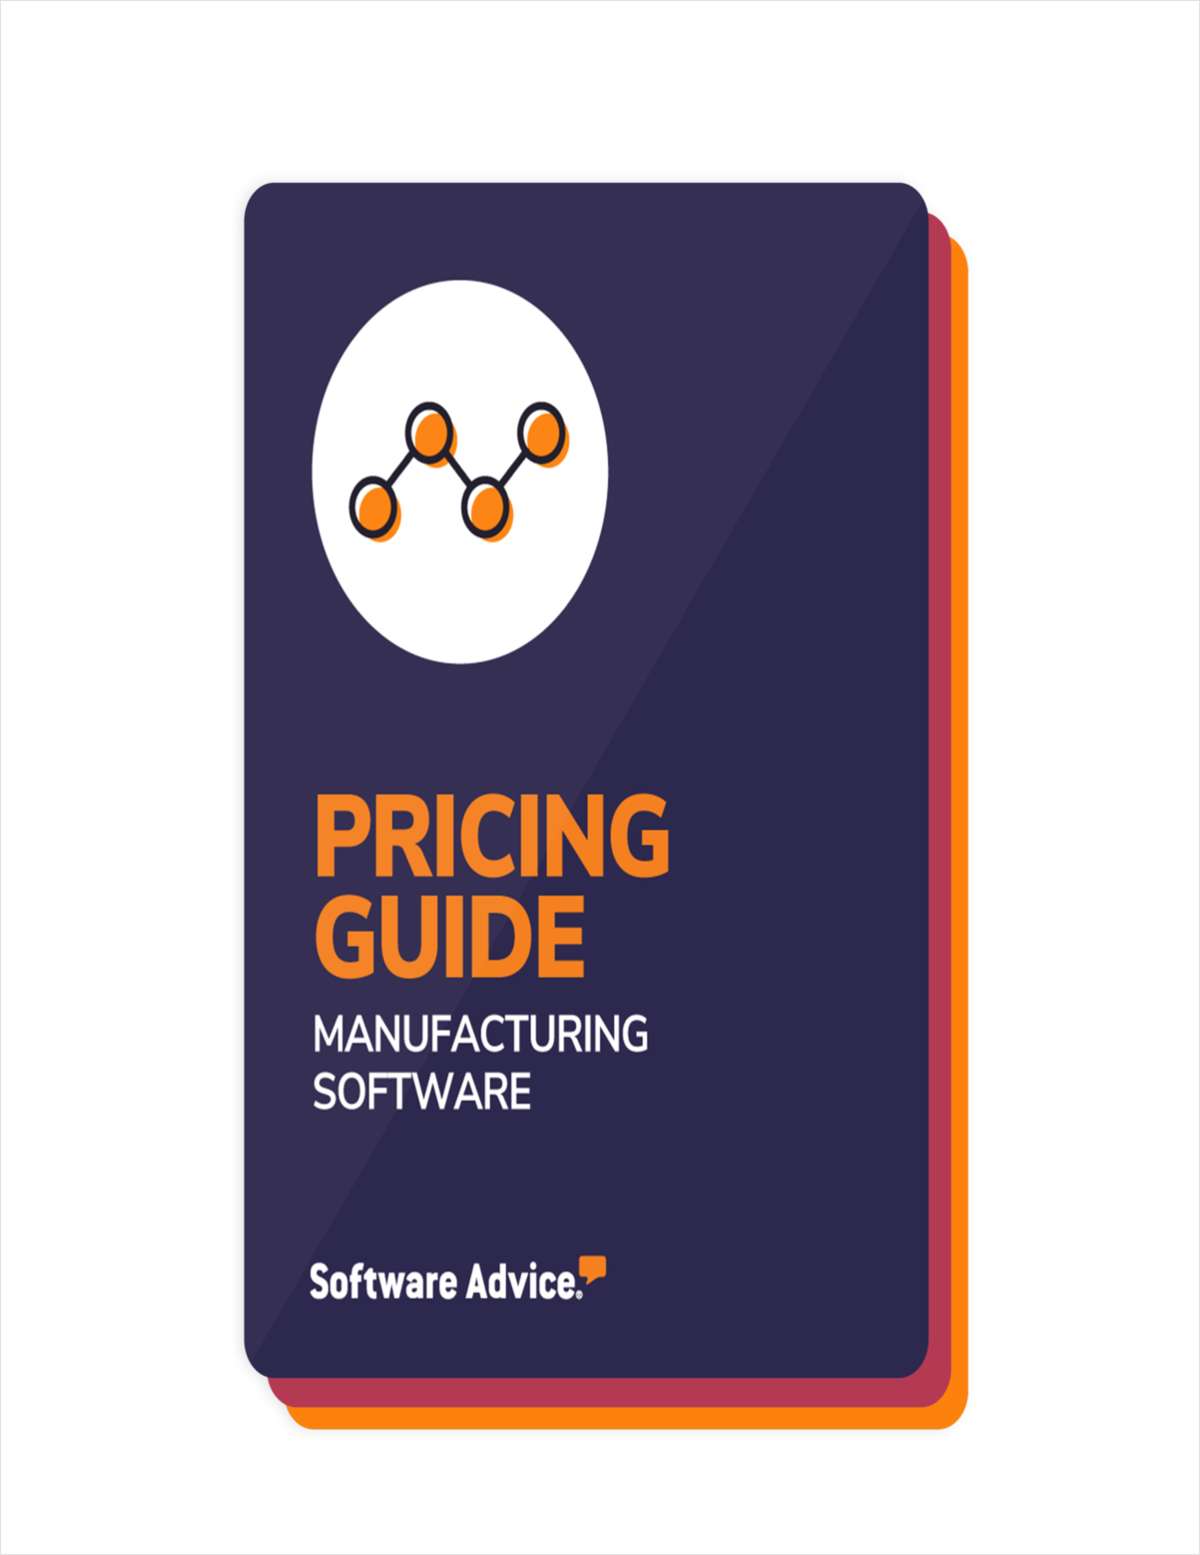 Don't Overpay: What to Know About Manufacturing Software Prices in 2022